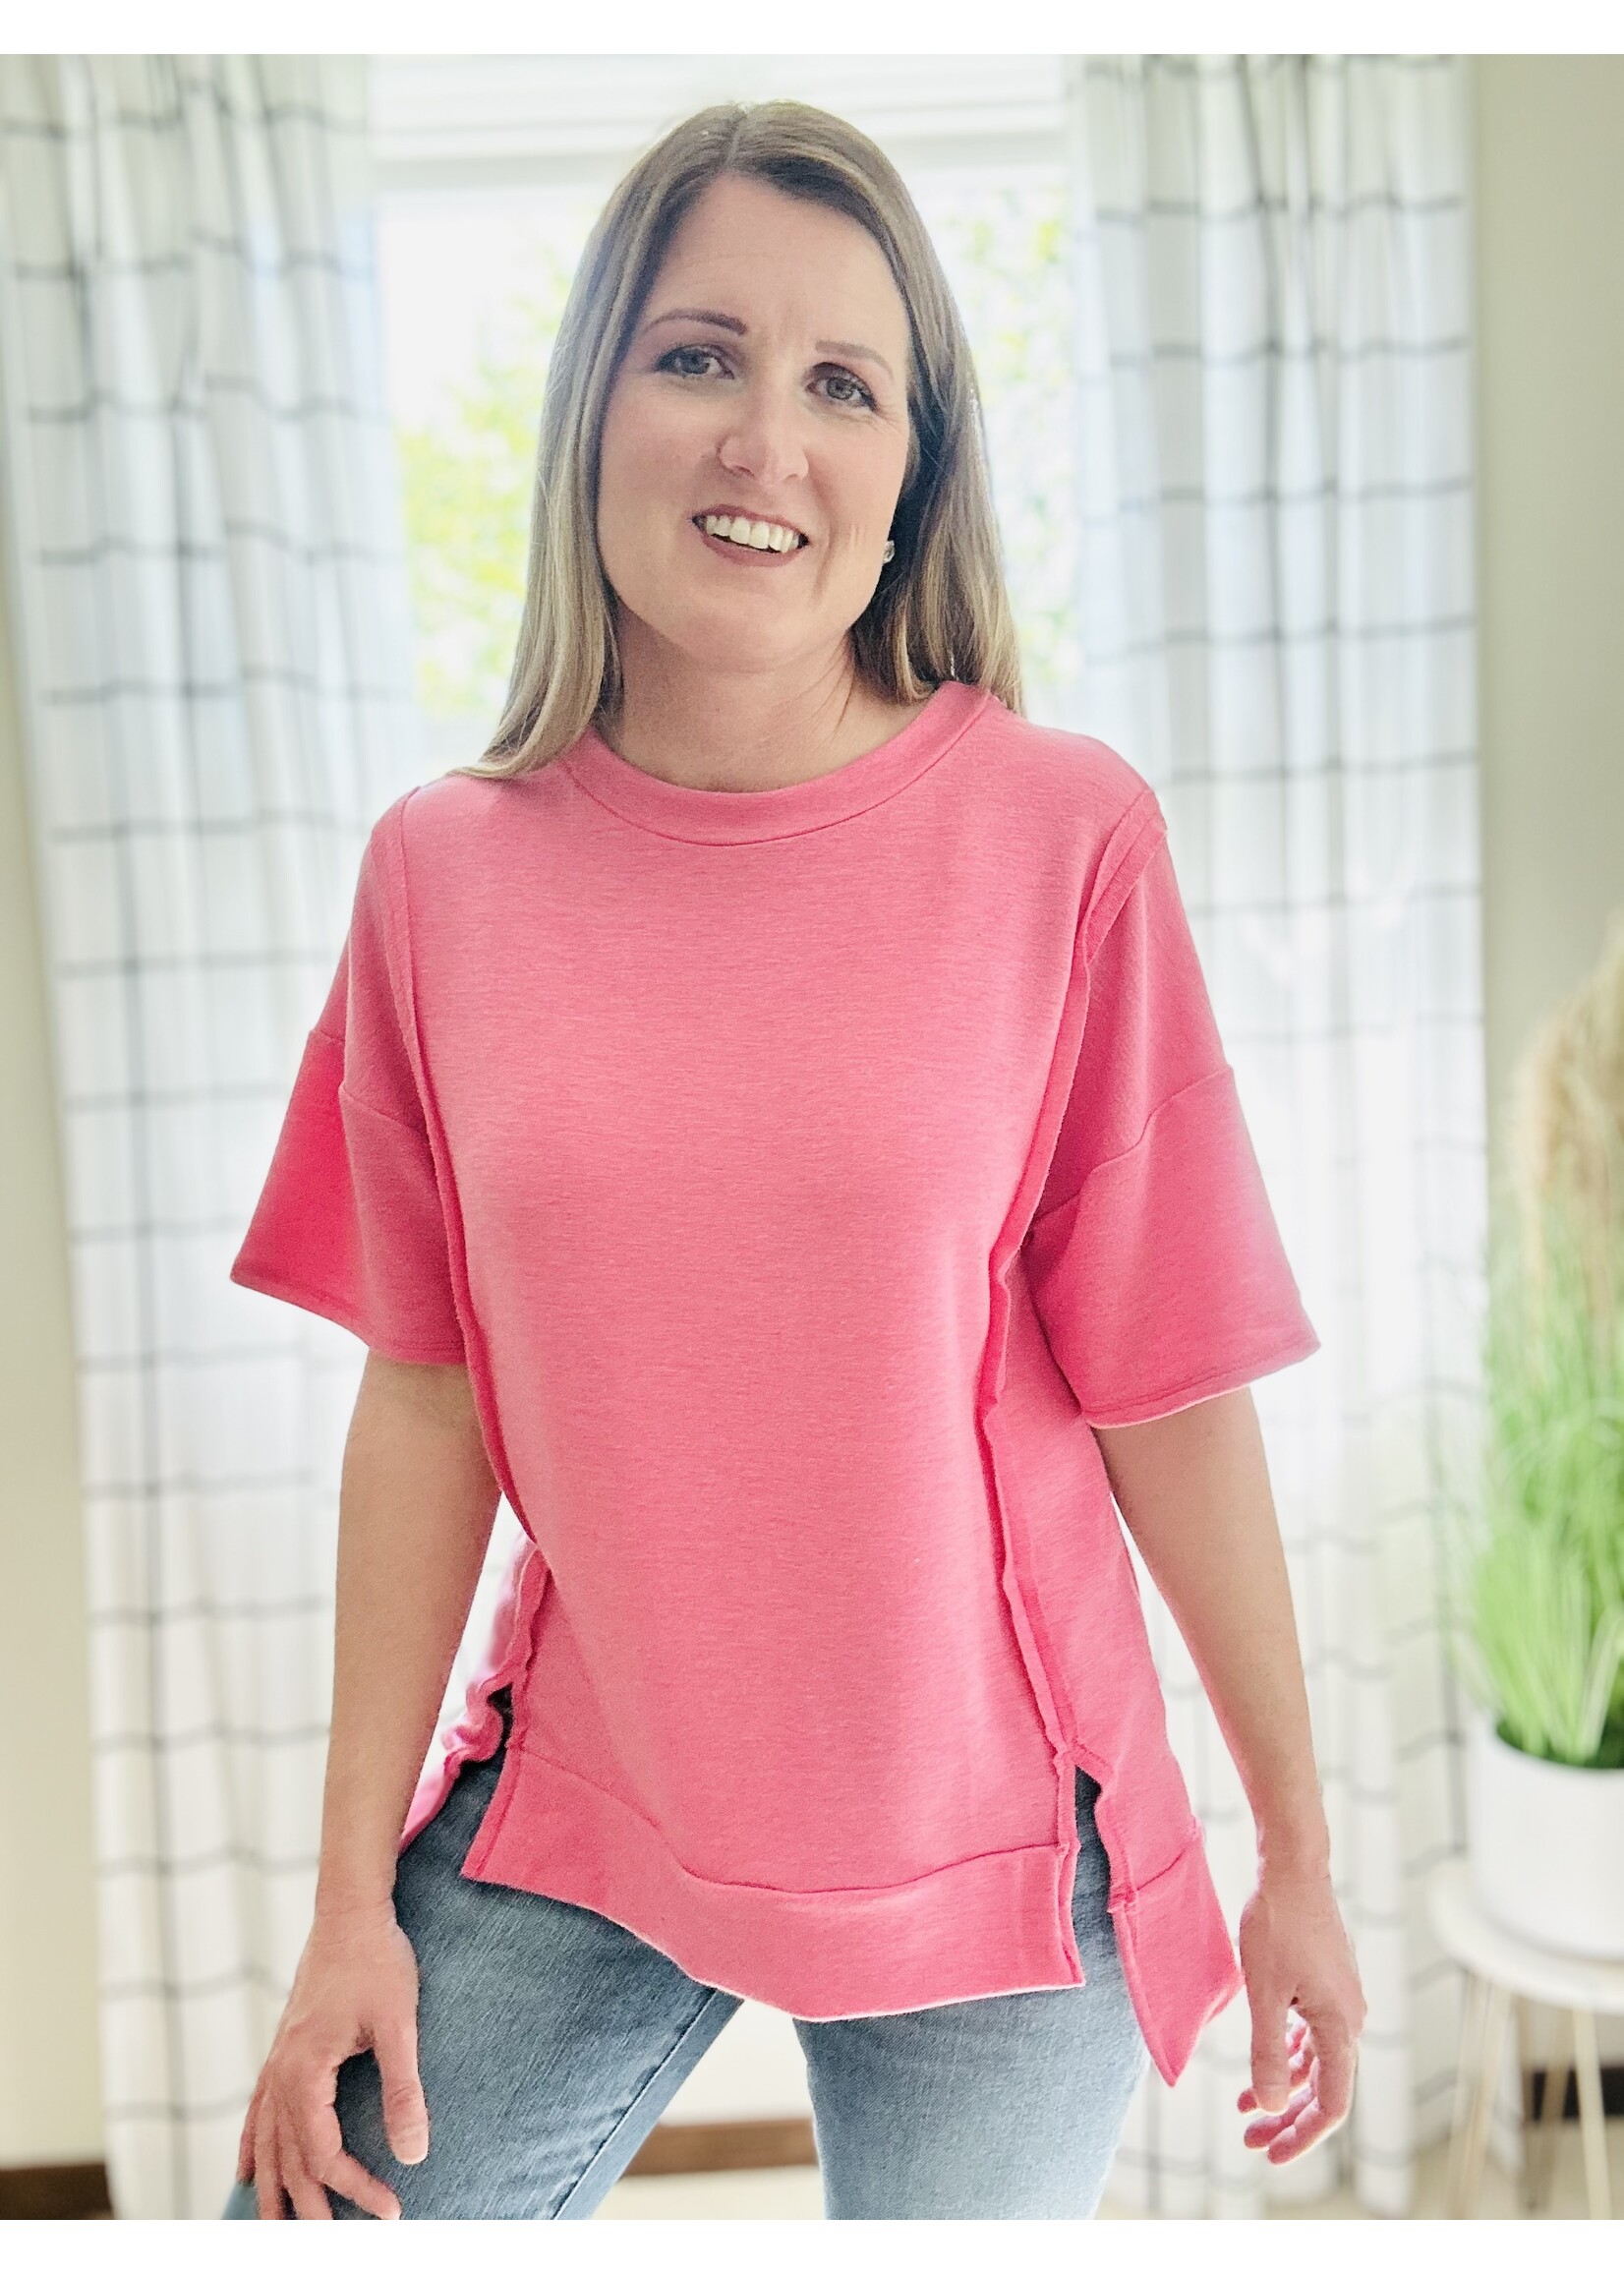 The Hallie Top in Hot Pink